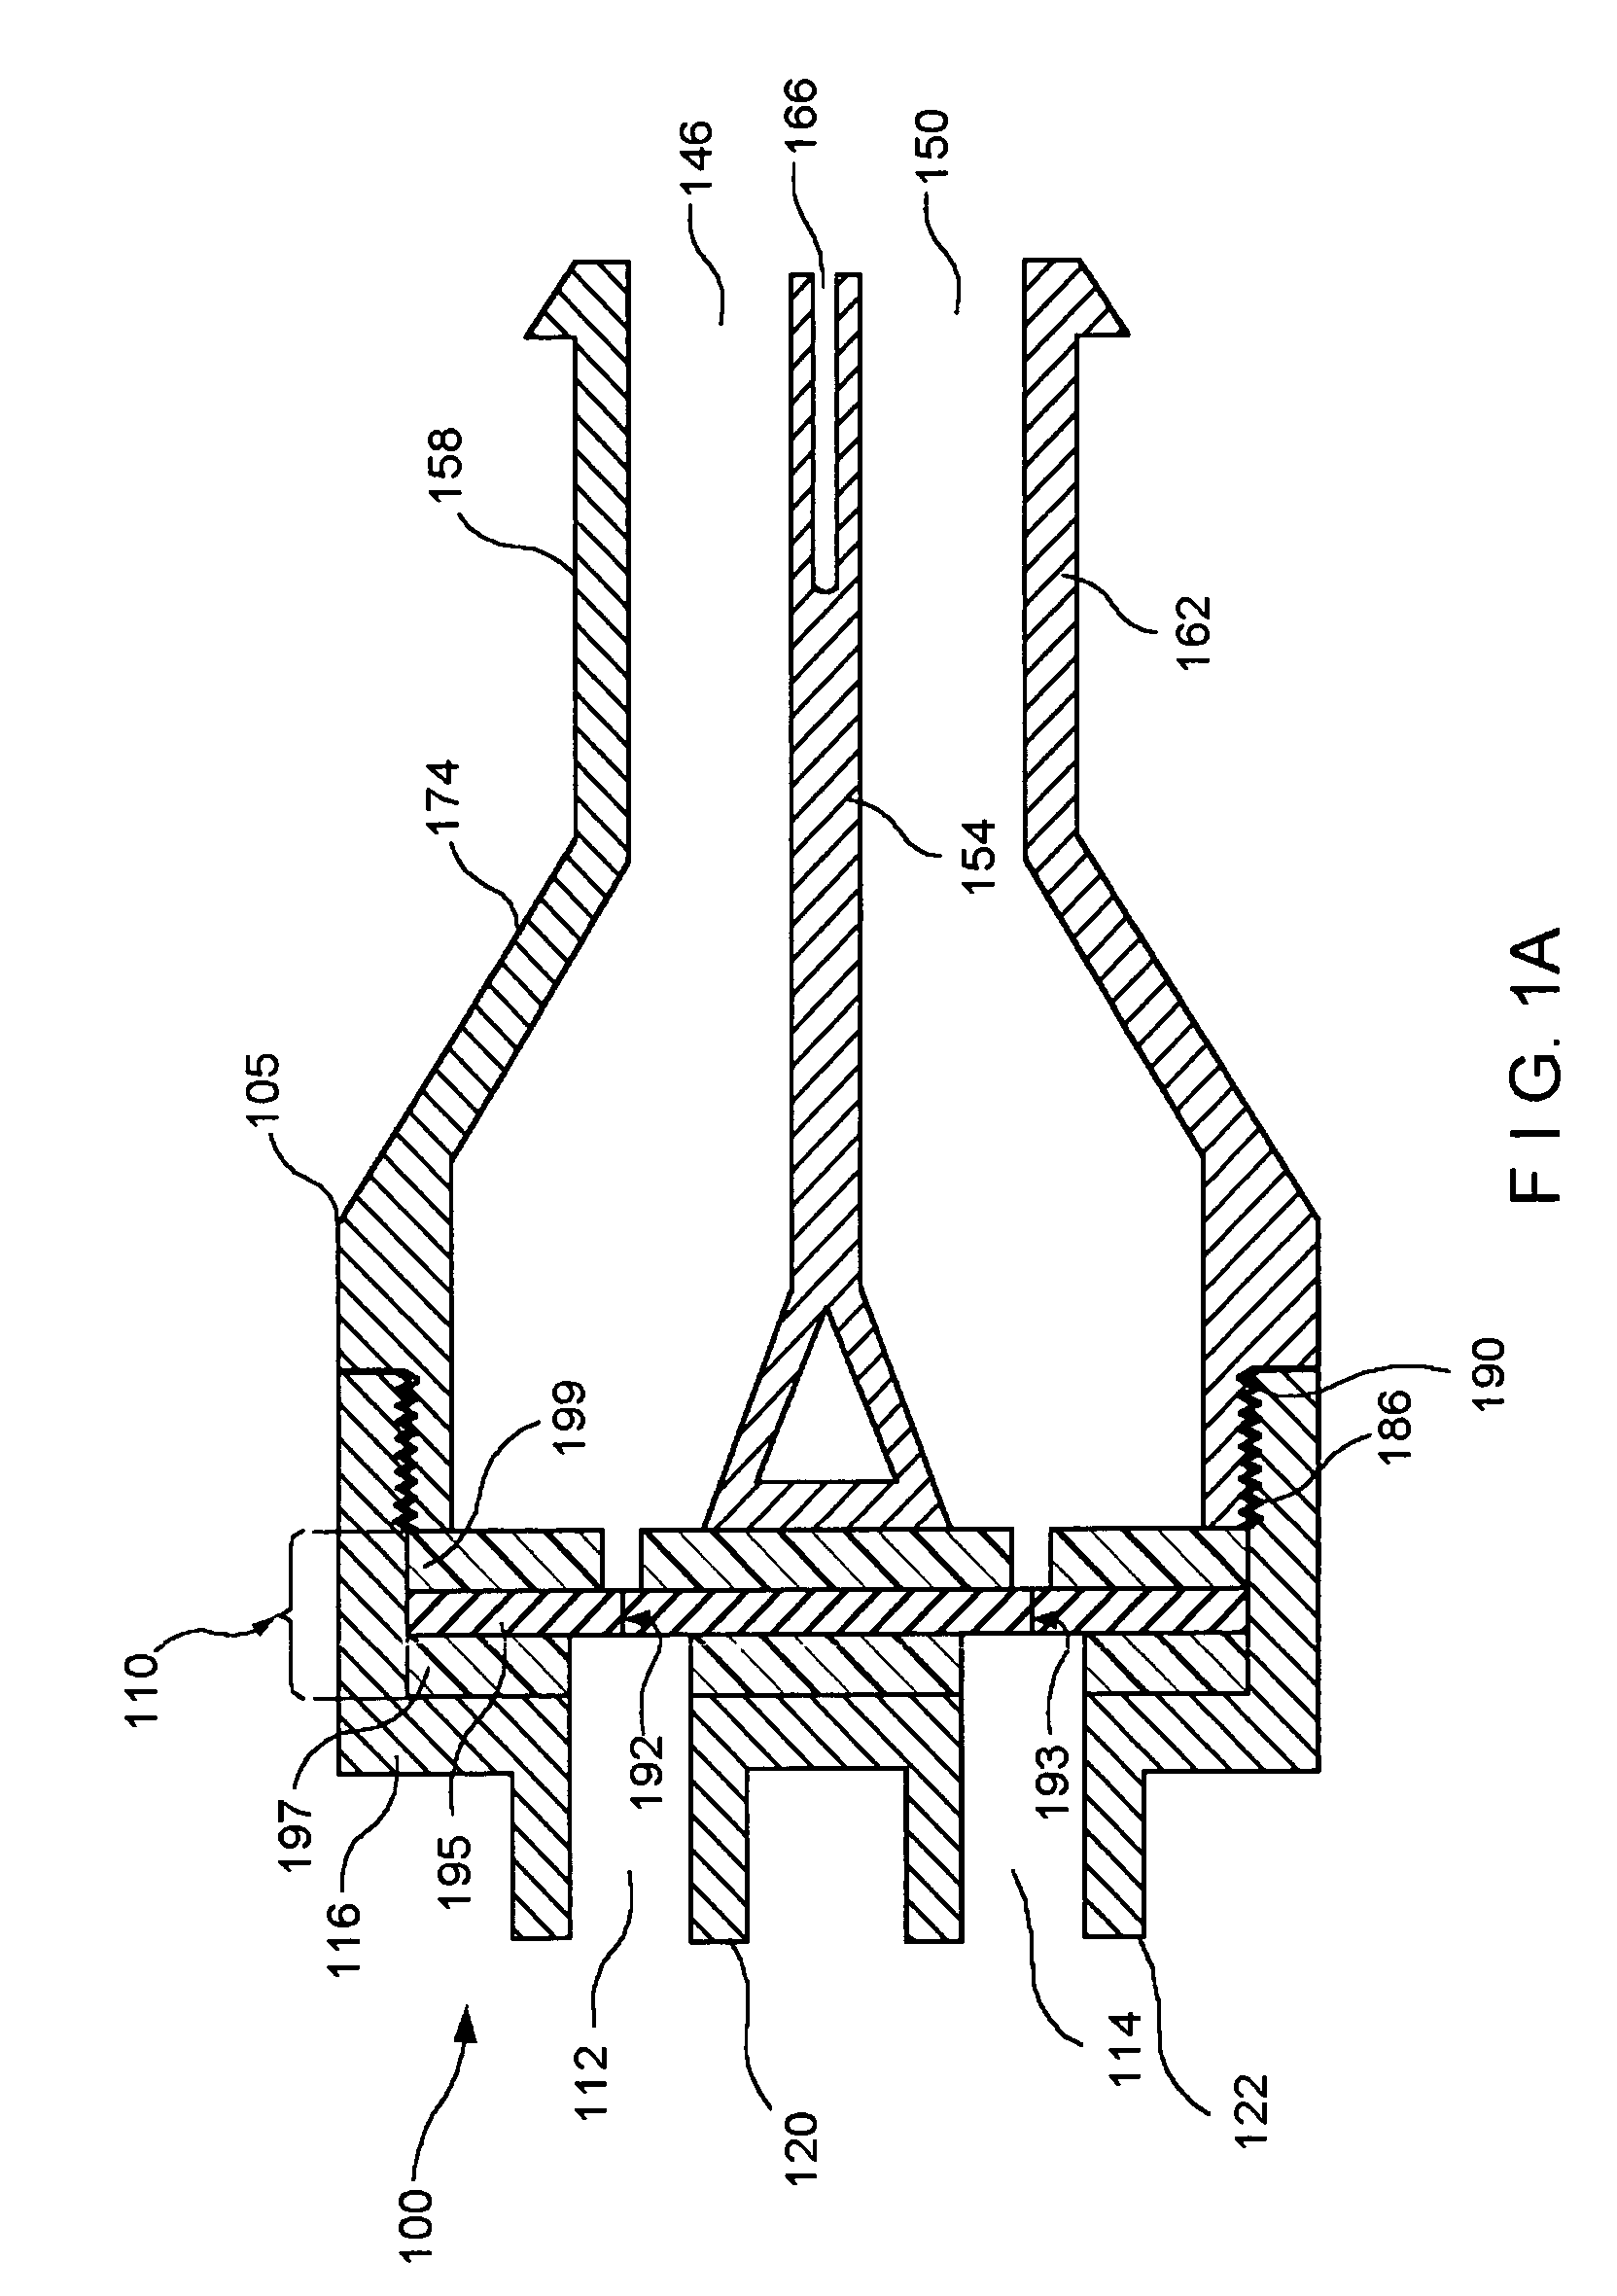 Pressure responsive slit valve assembly for a plurality of fluids and uses thereof